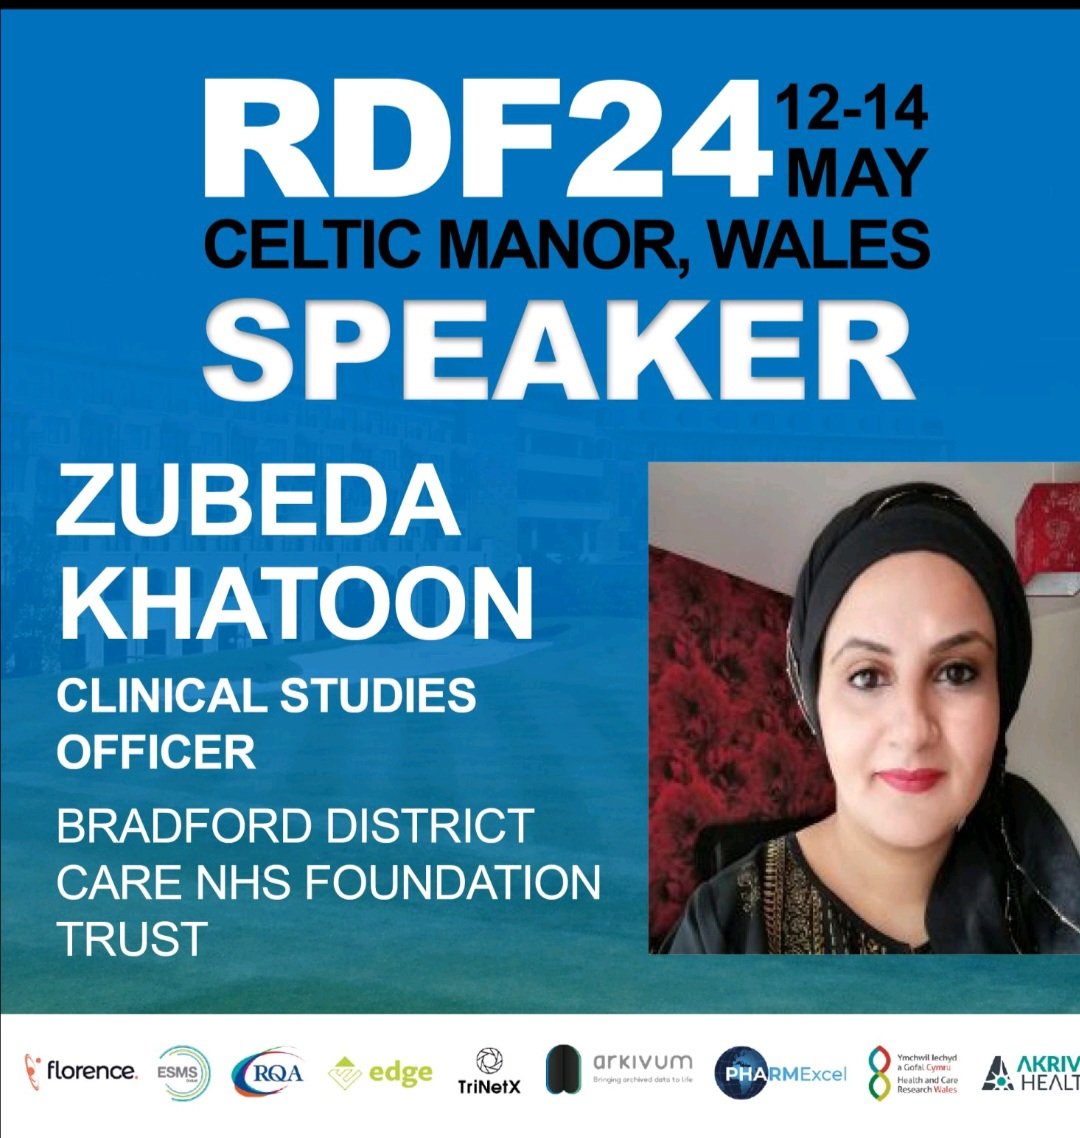 Ma shaa Allah 🫣 in shaa Allah very much looking forward to attending and speaking at the conference. Excited!! #RDF24 #HealthcareResearch #UKHealthcare